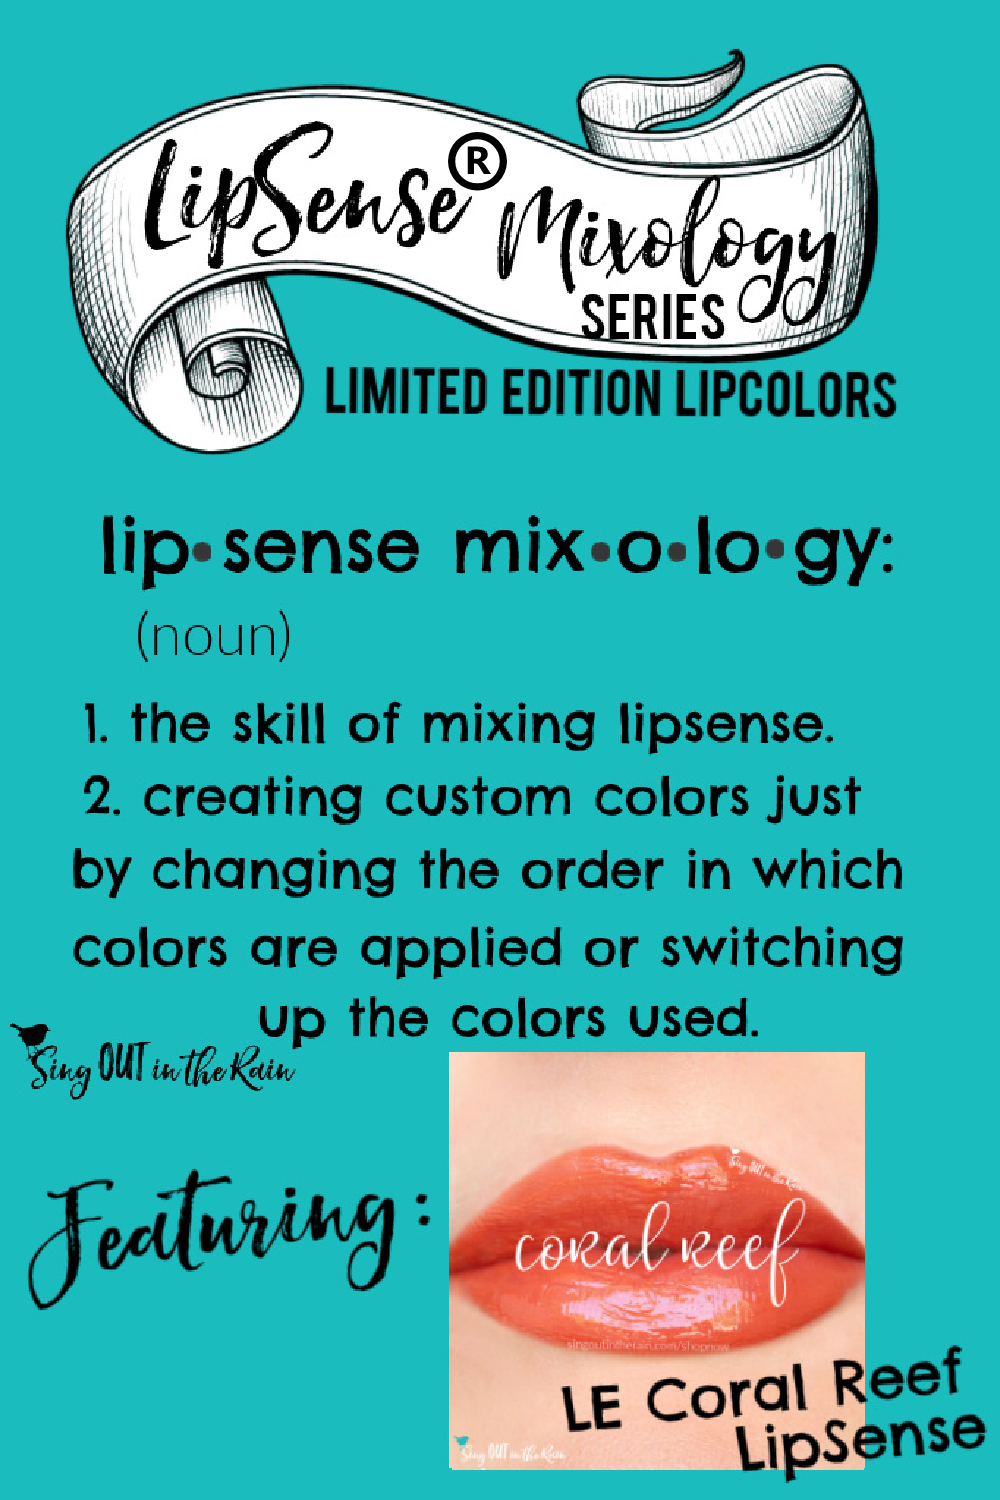 The Ultimate Guide to Coral Reef LipSense Mixology